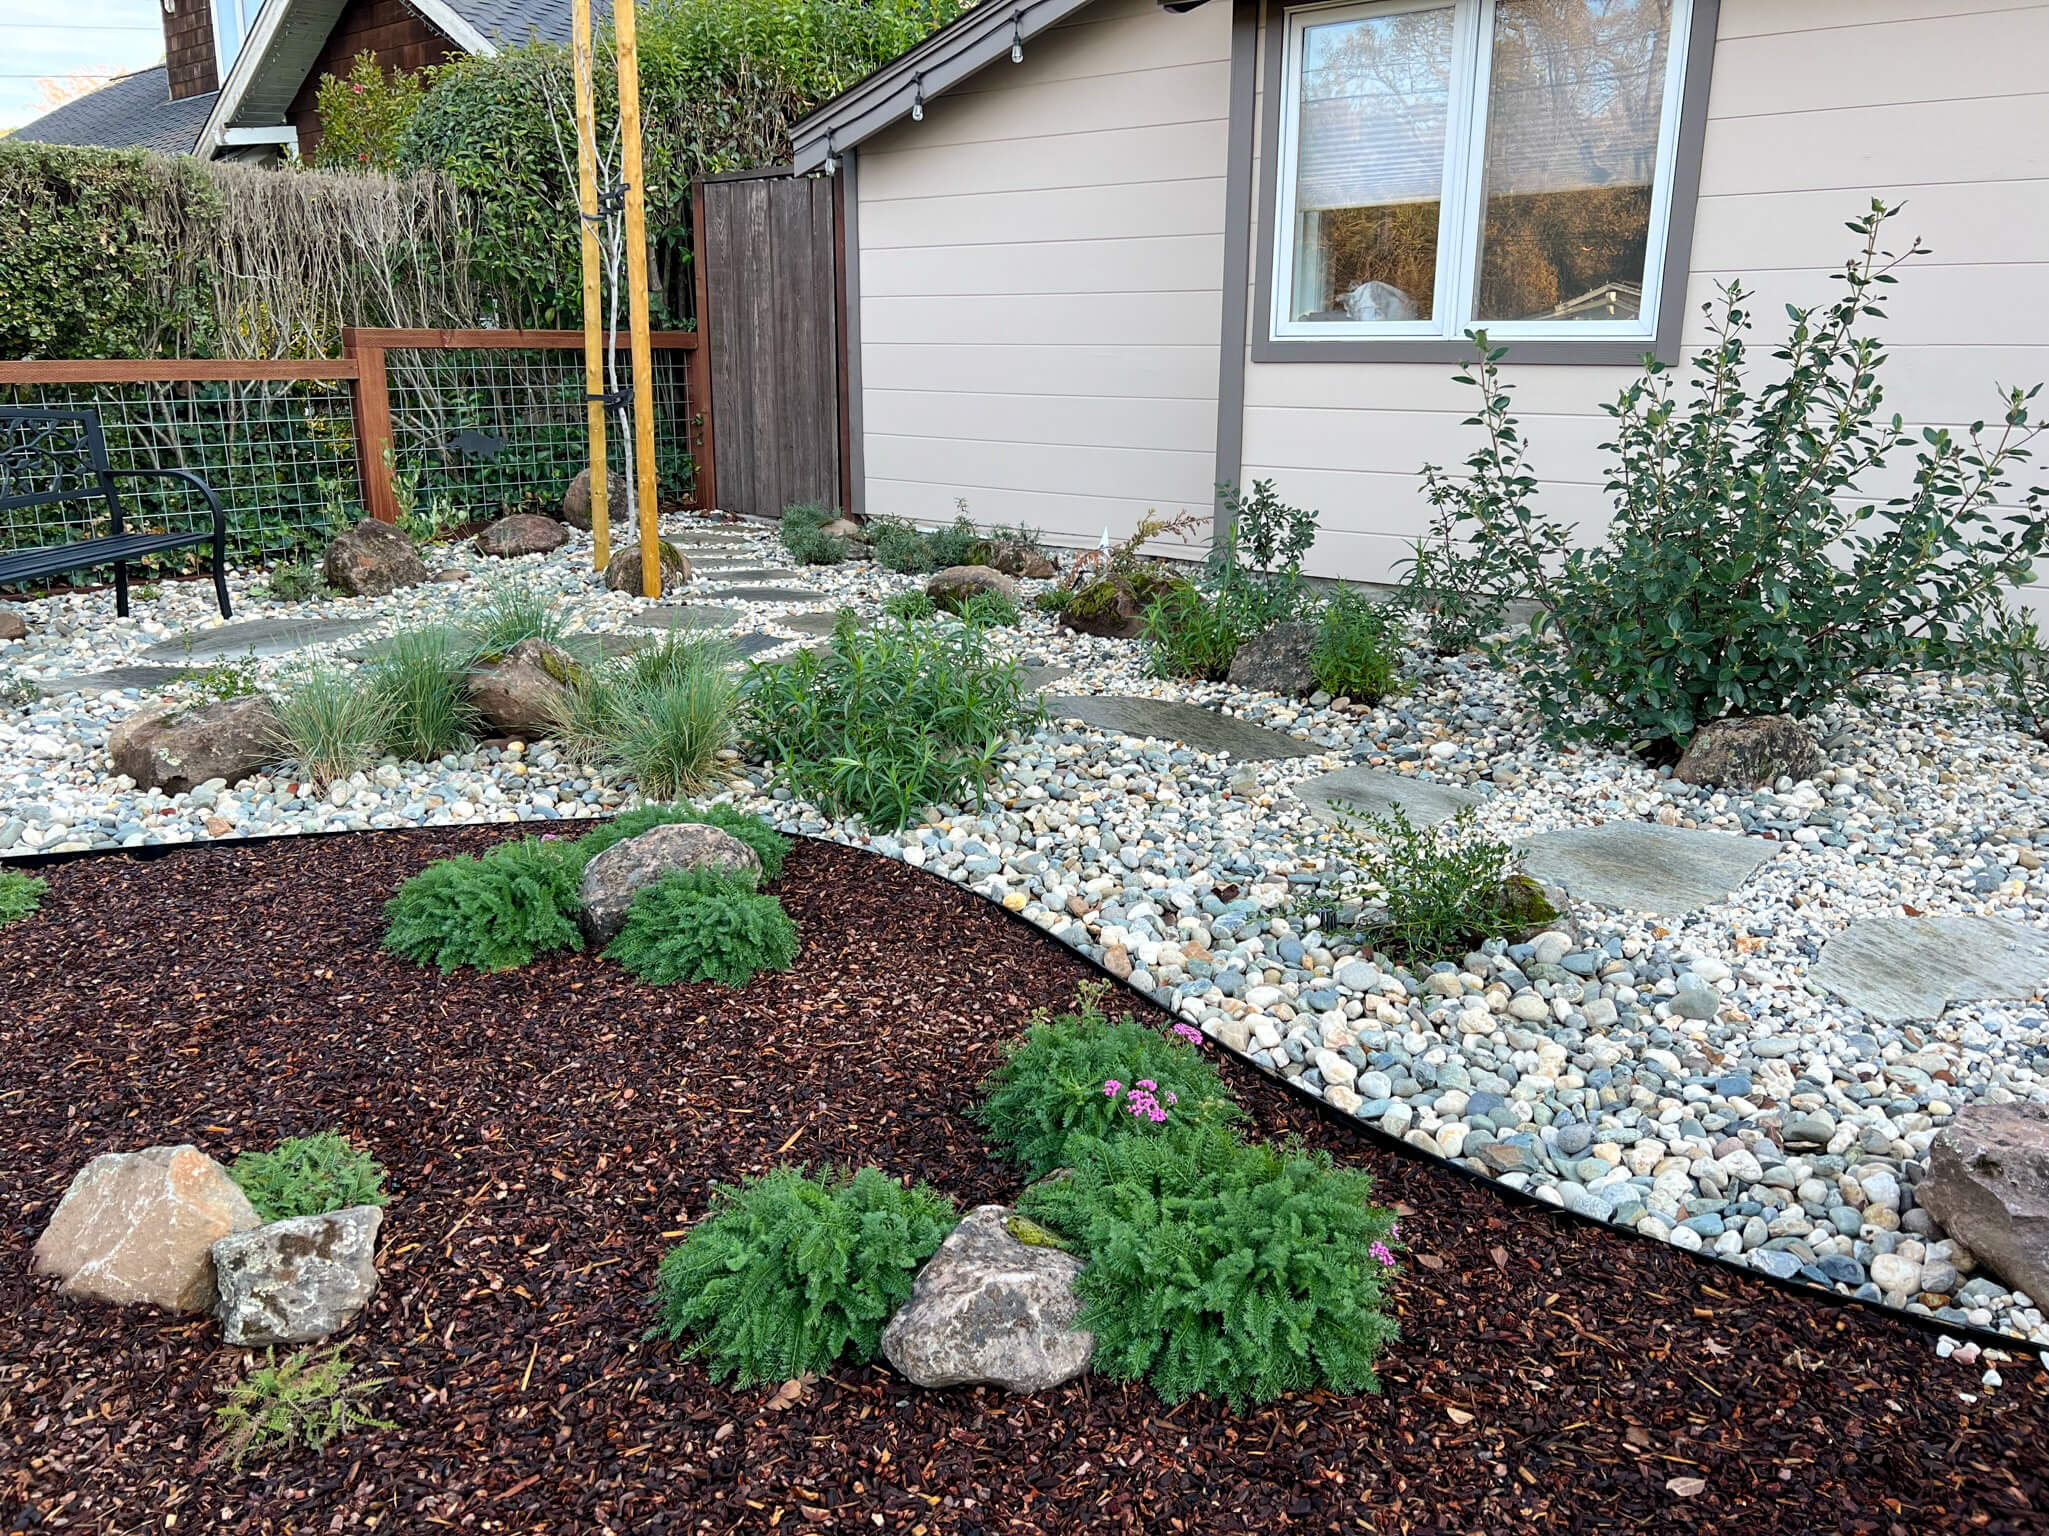 Professional Hardscape Construction Services Building Solid Foundations For Lasting Beauty5